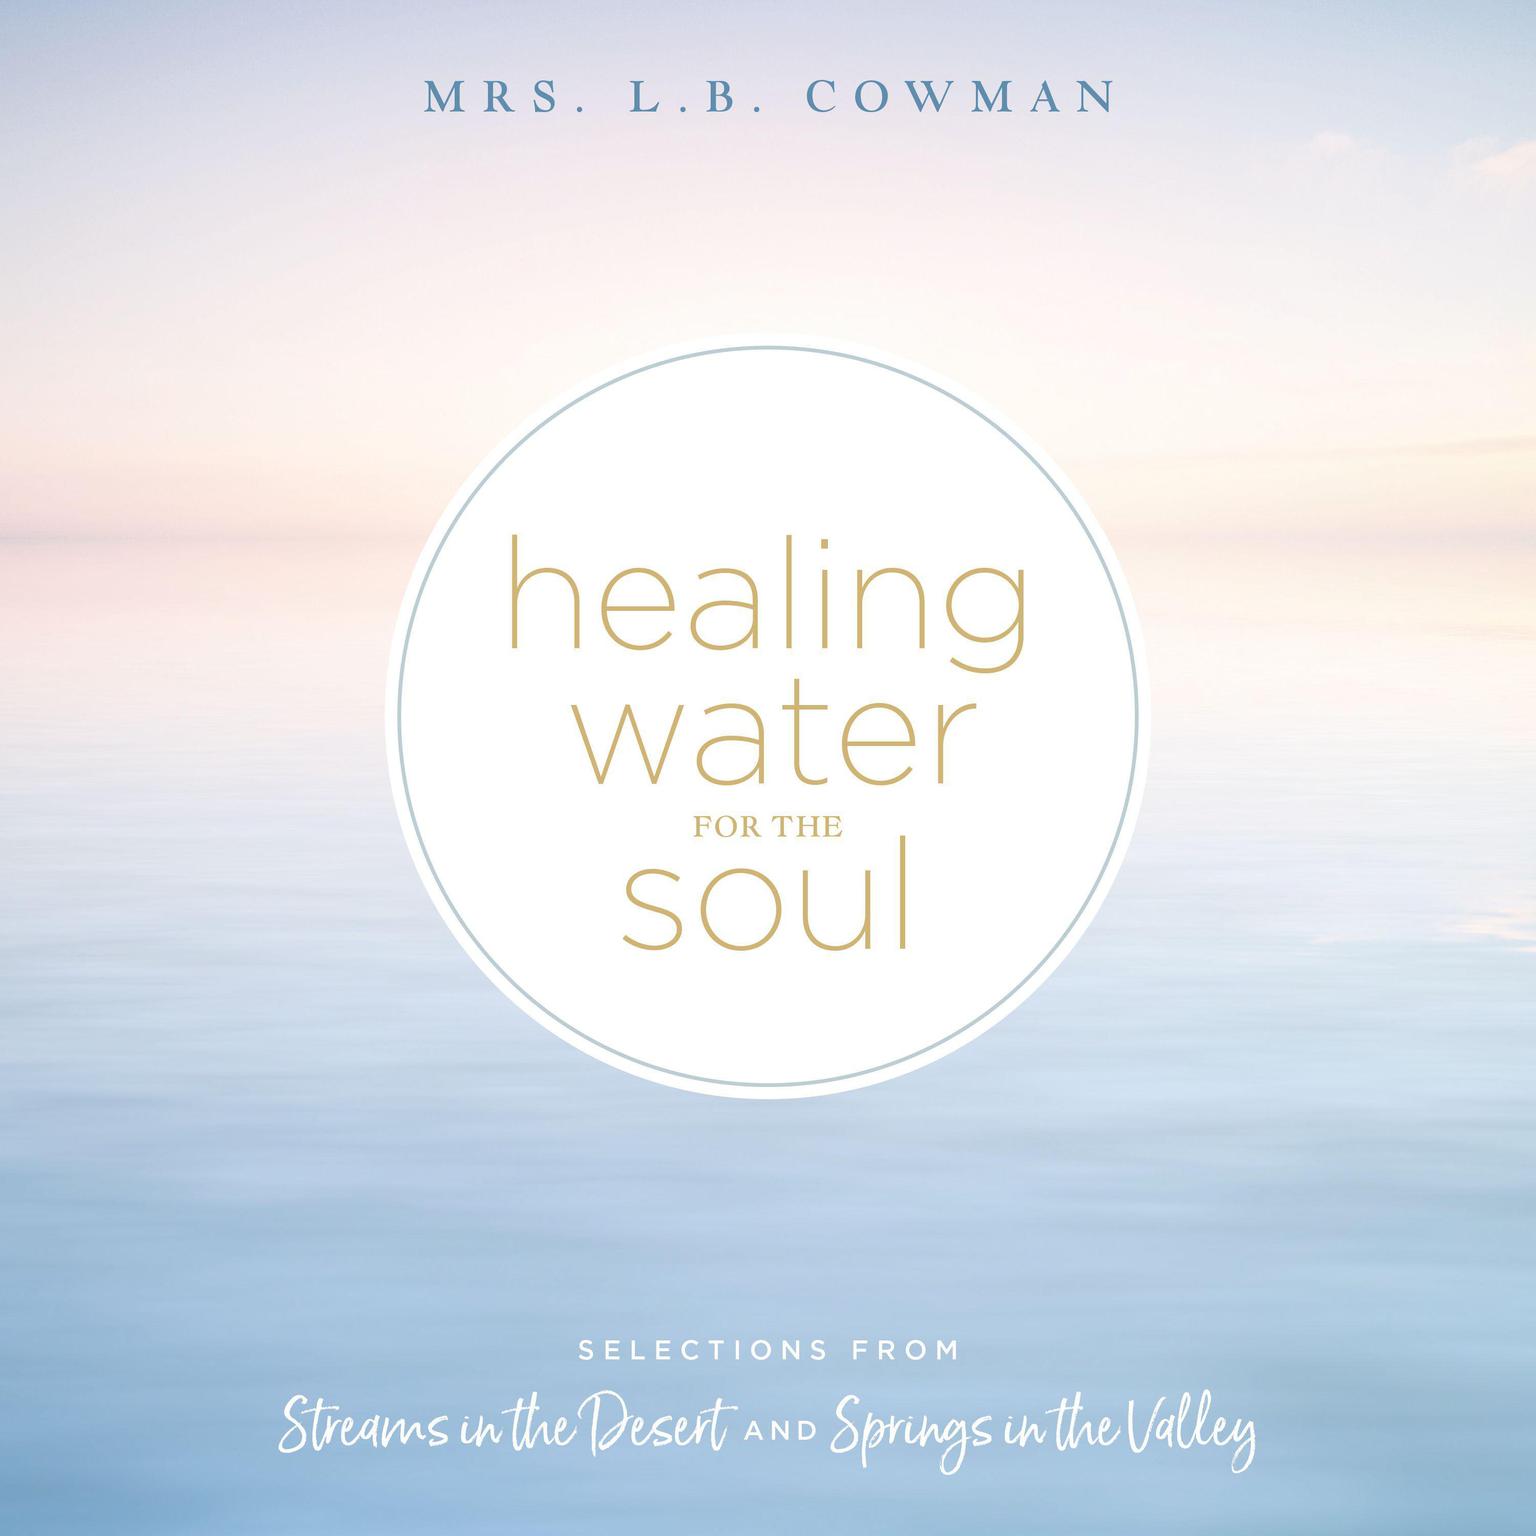 Healing Water for the Soul: Selections from Streams in the Desert and Springs in the Valley Audiobook, by L. B. E. Cowman